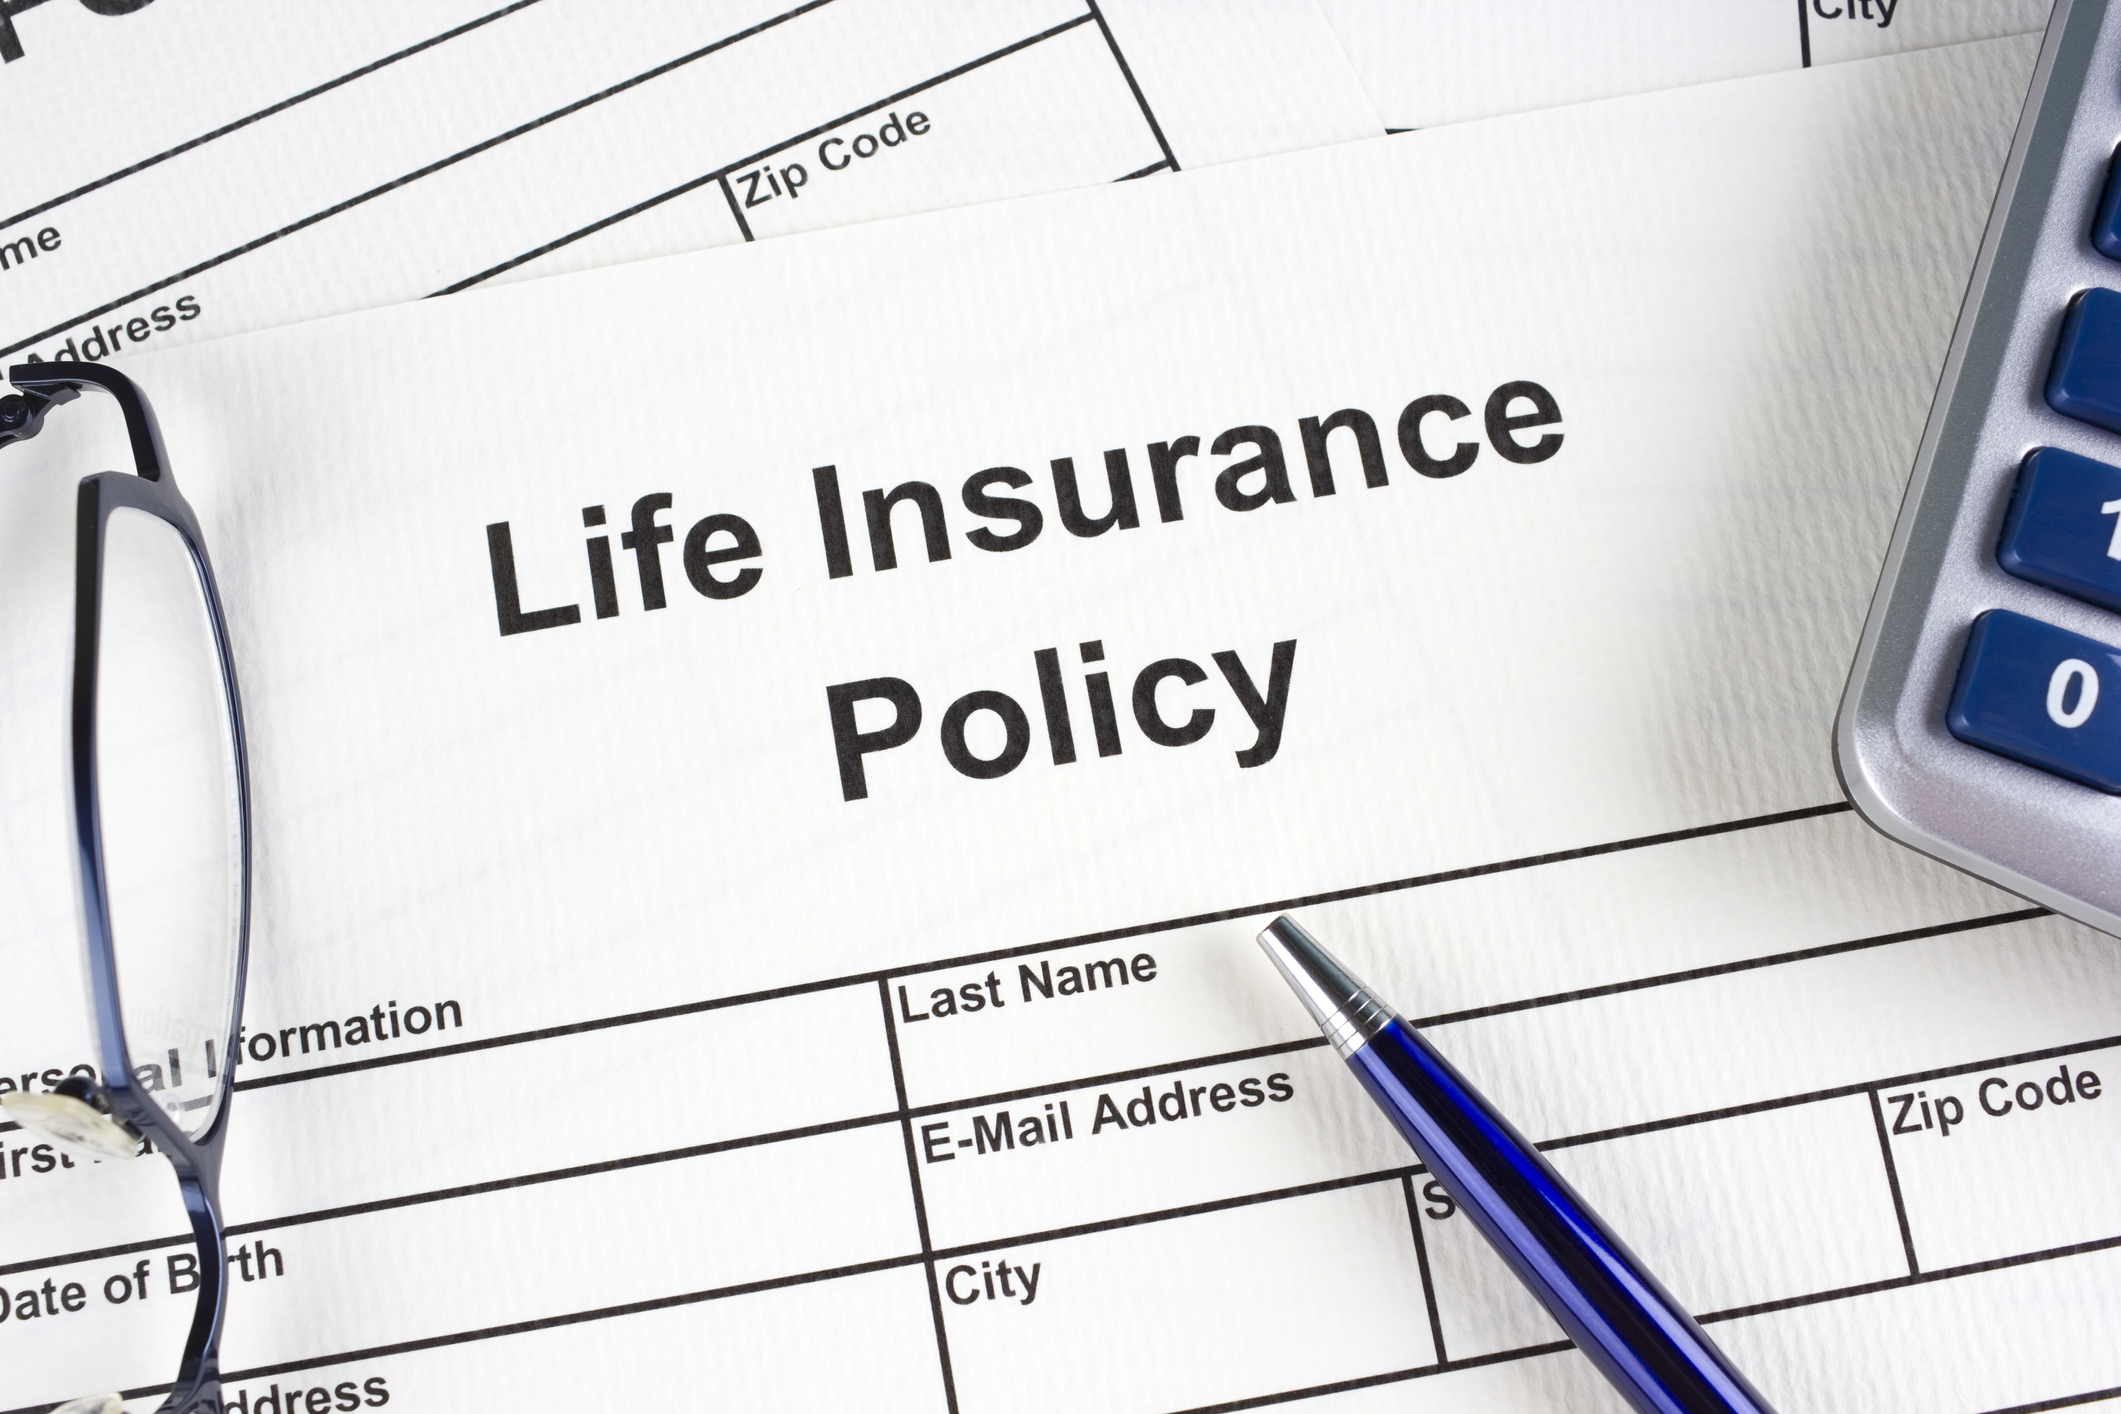 Insurance Products and Services in Conroe, TX